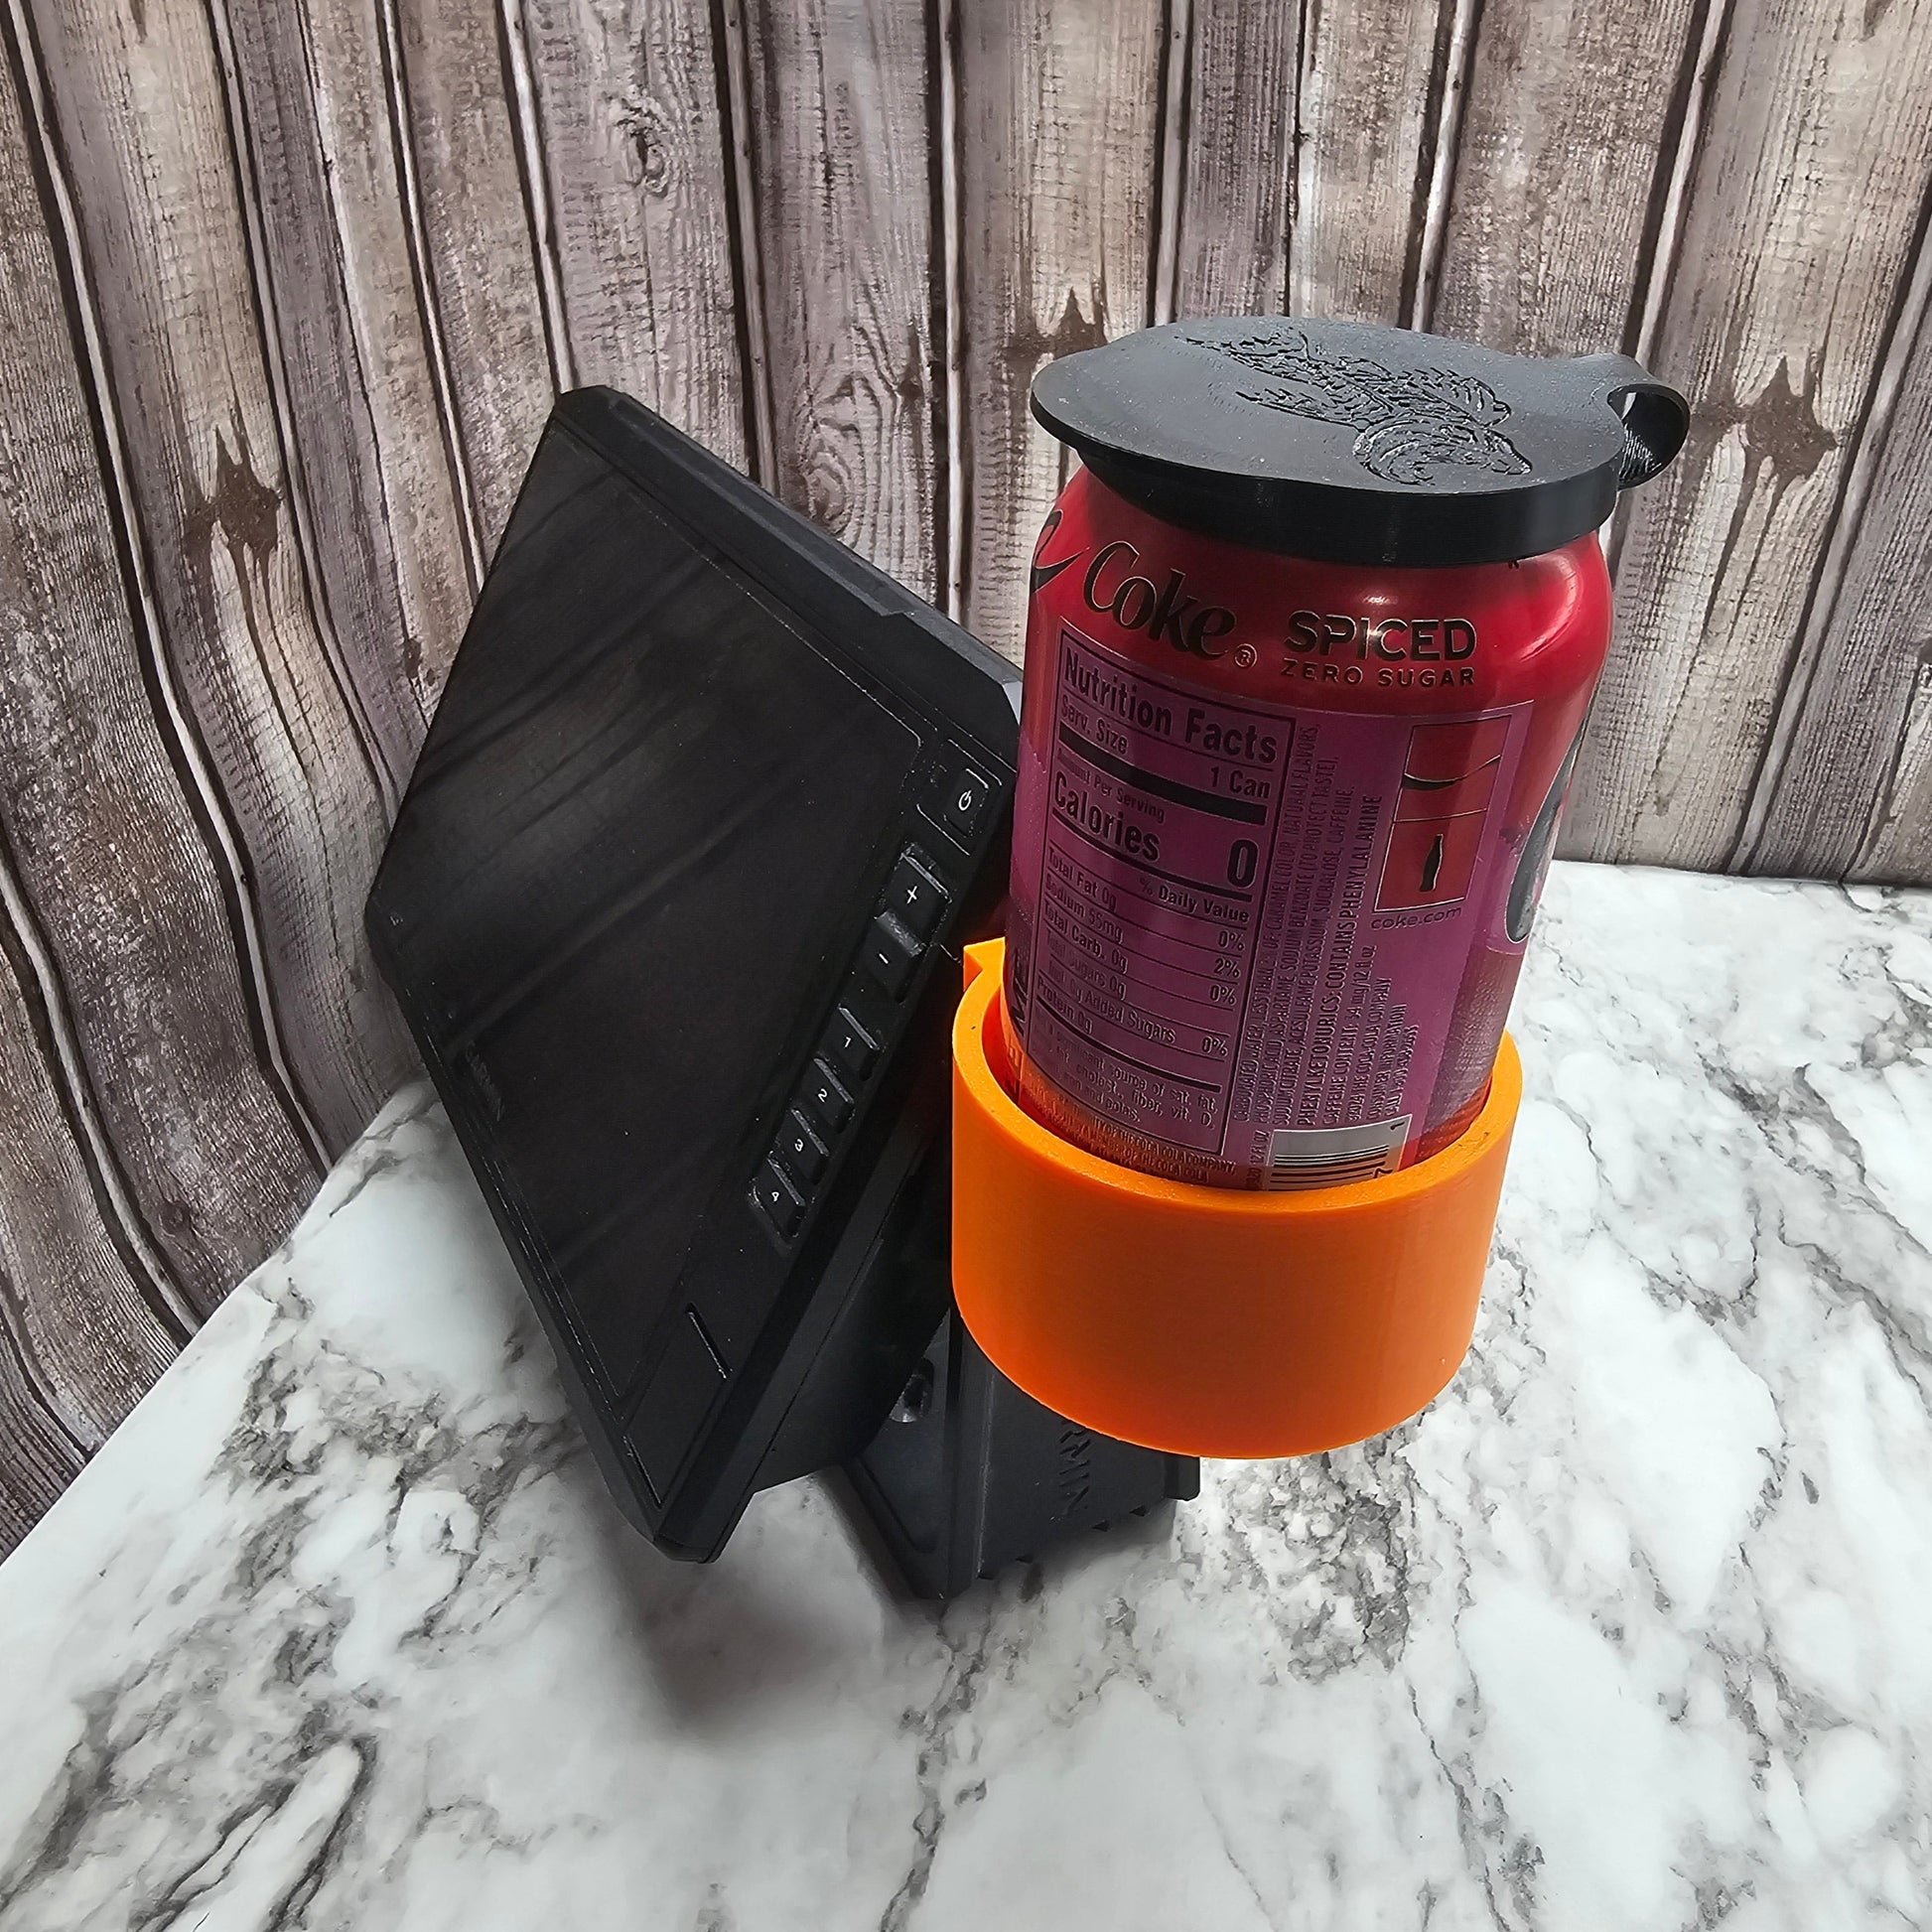 Photo showing the drink holder holding a can of soda from the side